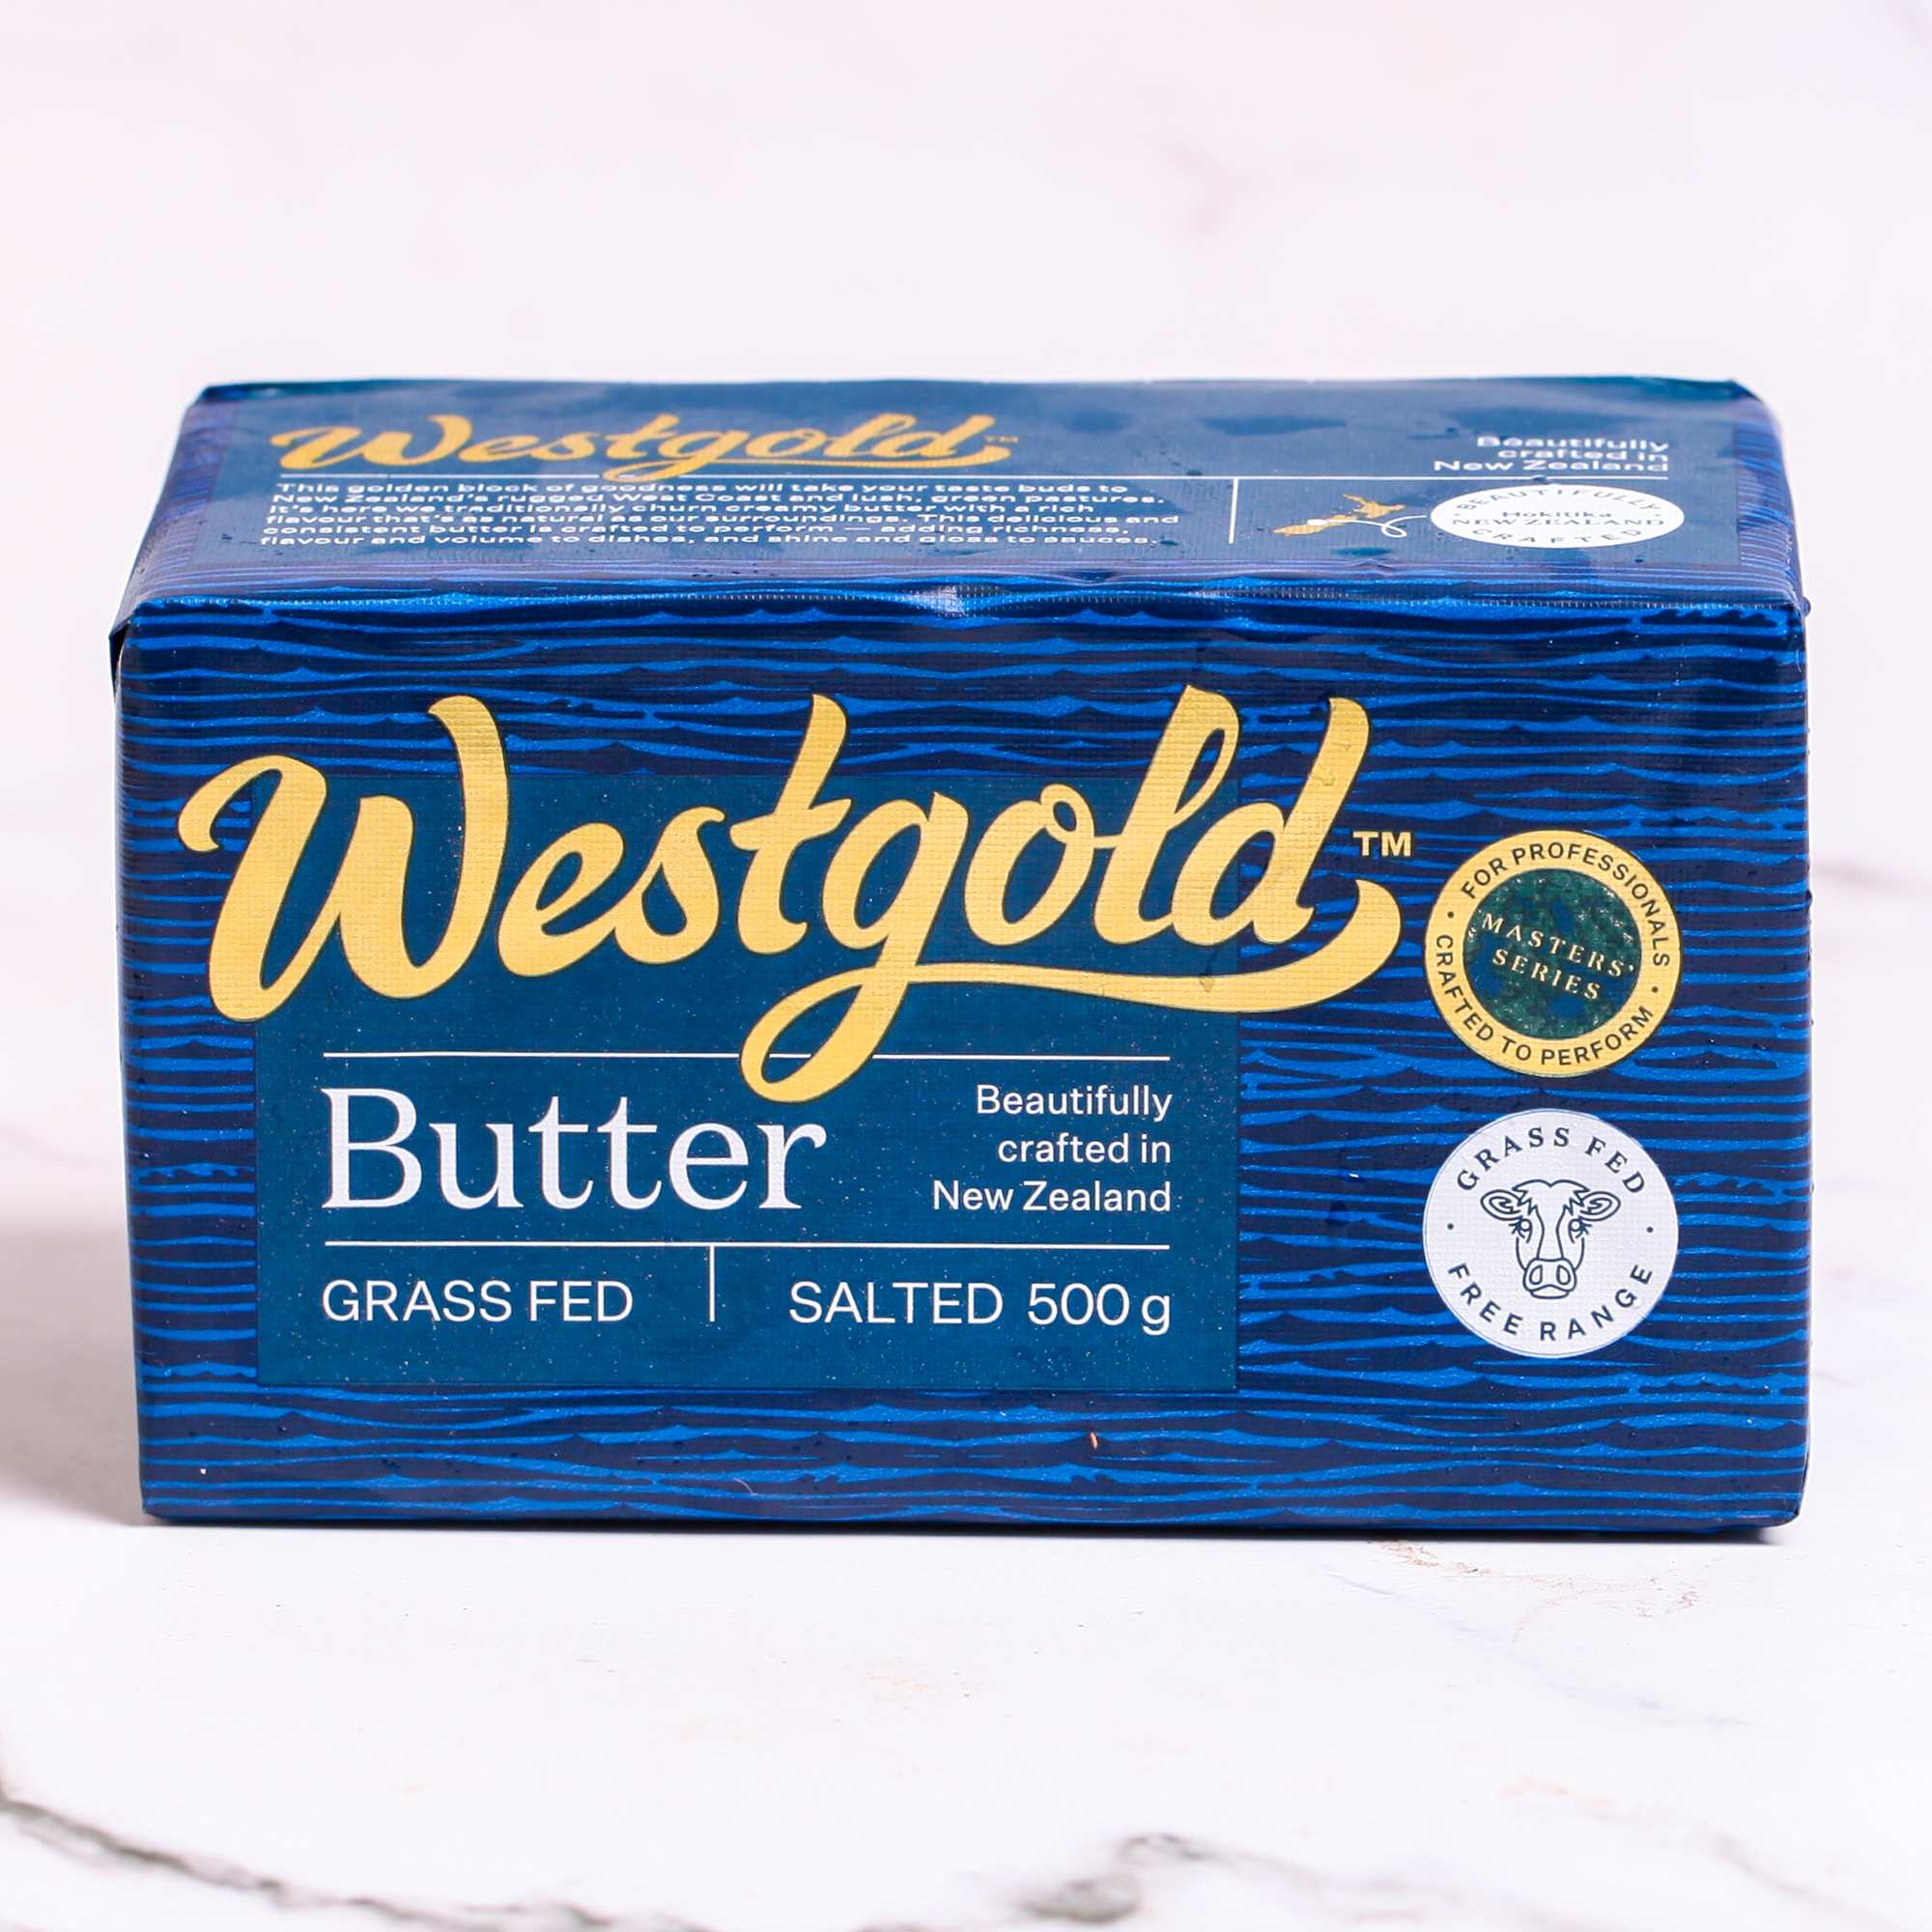 Grass-fed salted butter by Westgold